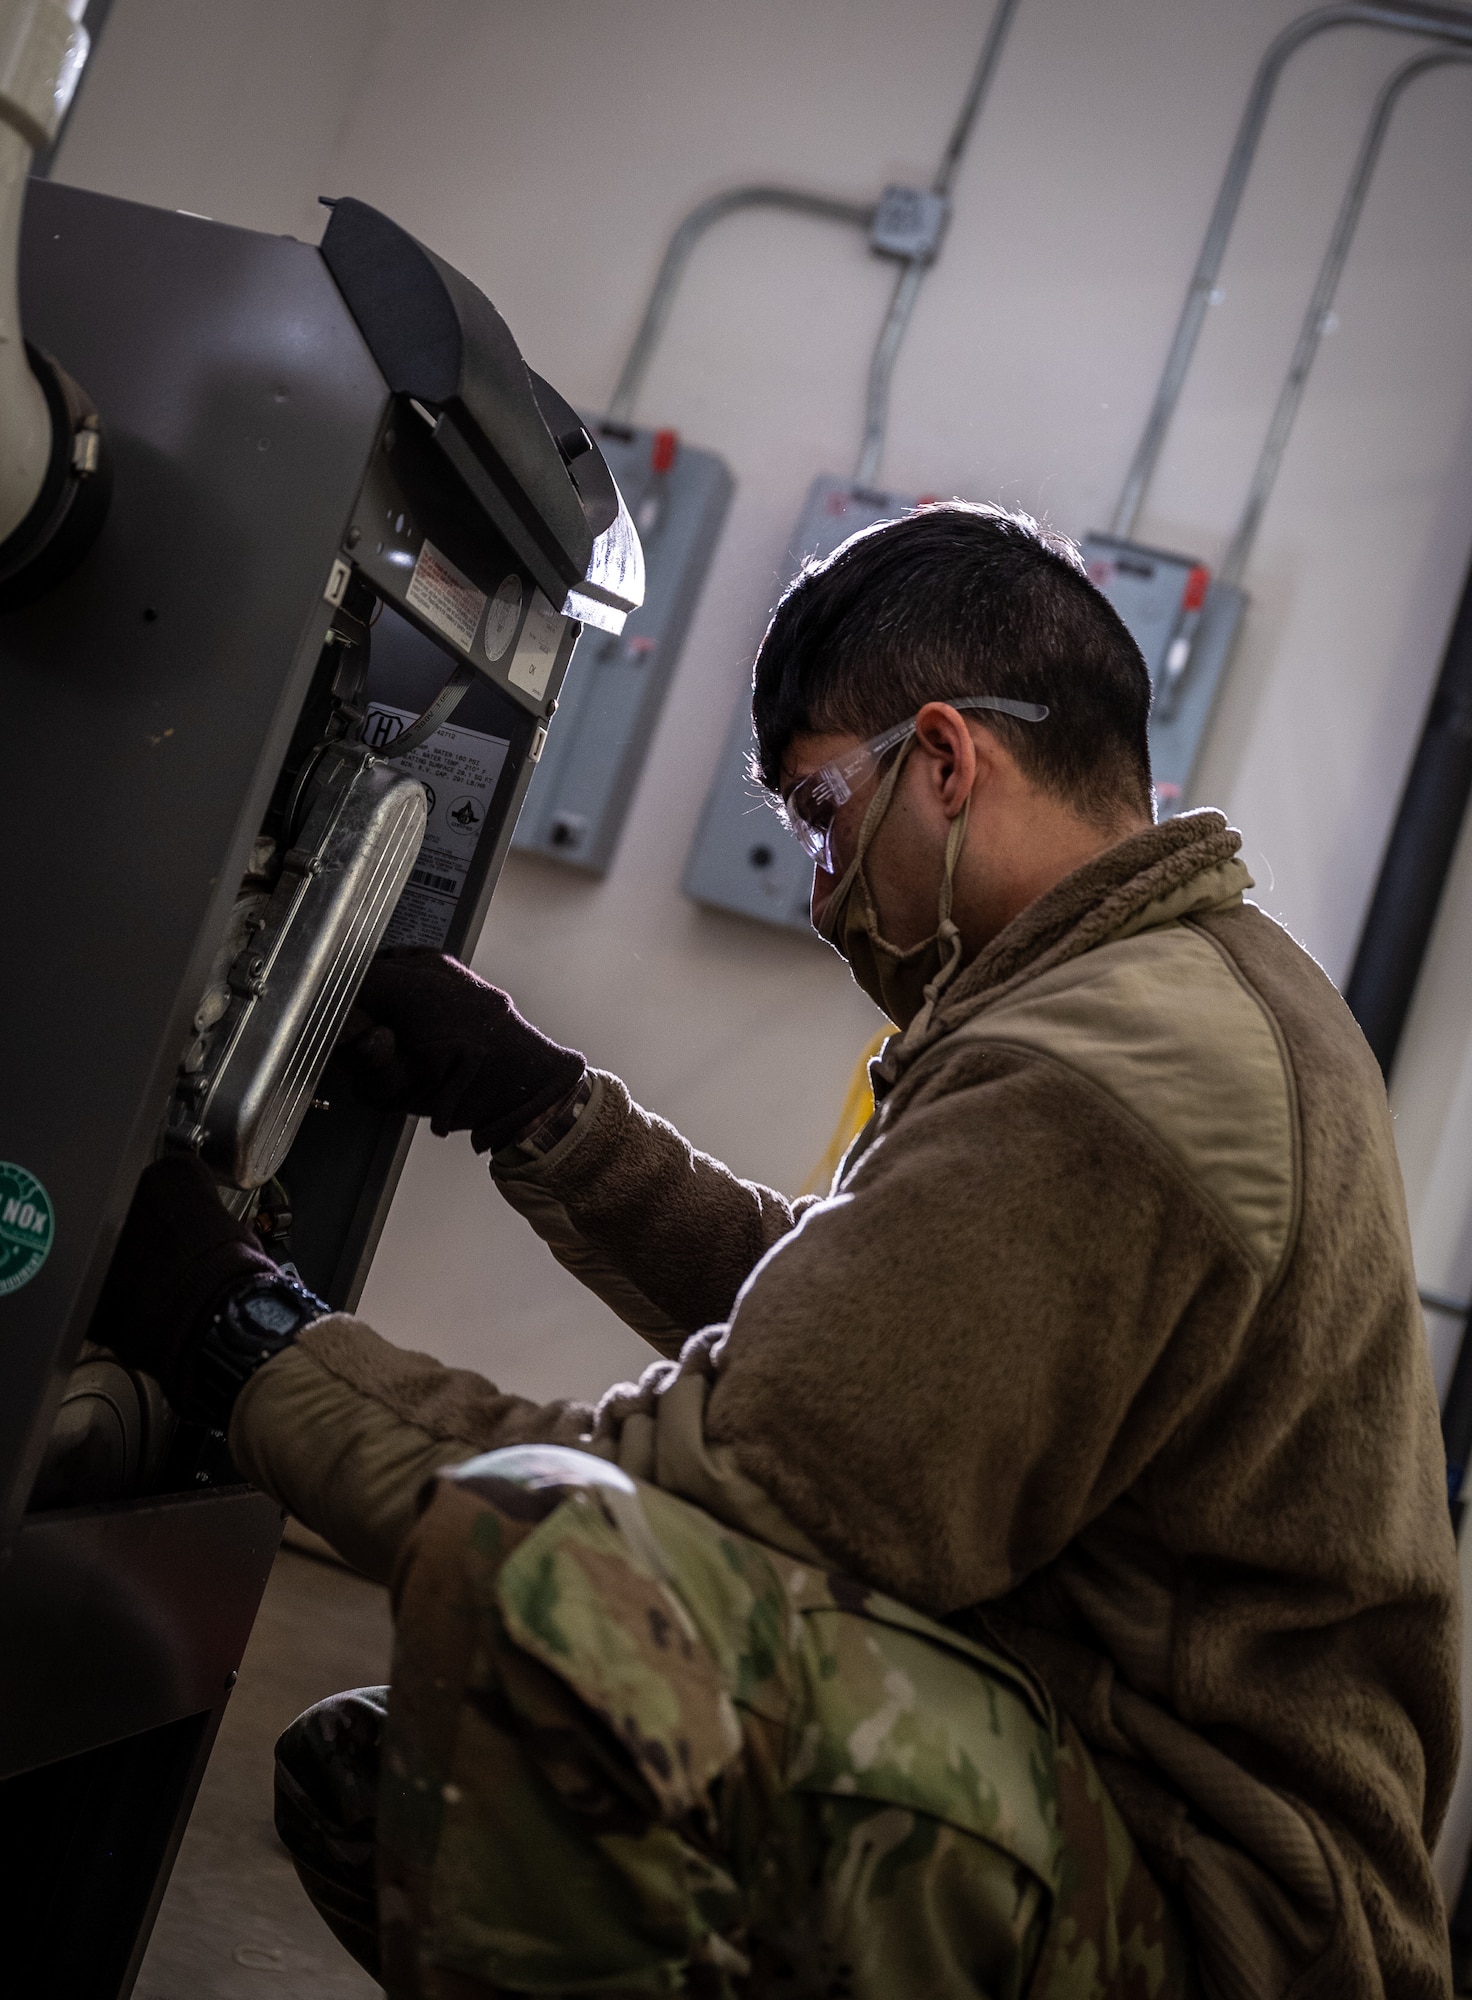 Staff Sgt. Randy Cintron 932nd Civil Engineer Squadron, heating, ventilation, and air conditioning journeyman reinstalls the heating exchanger from a heating boiler after it was cleaned of all carbon buildup February 5, 2021, inside building 3651, the 932nd Medical Group building, Scott Air Force Base, Illinois. (U.S. Air Force photo by Christopher Parr)